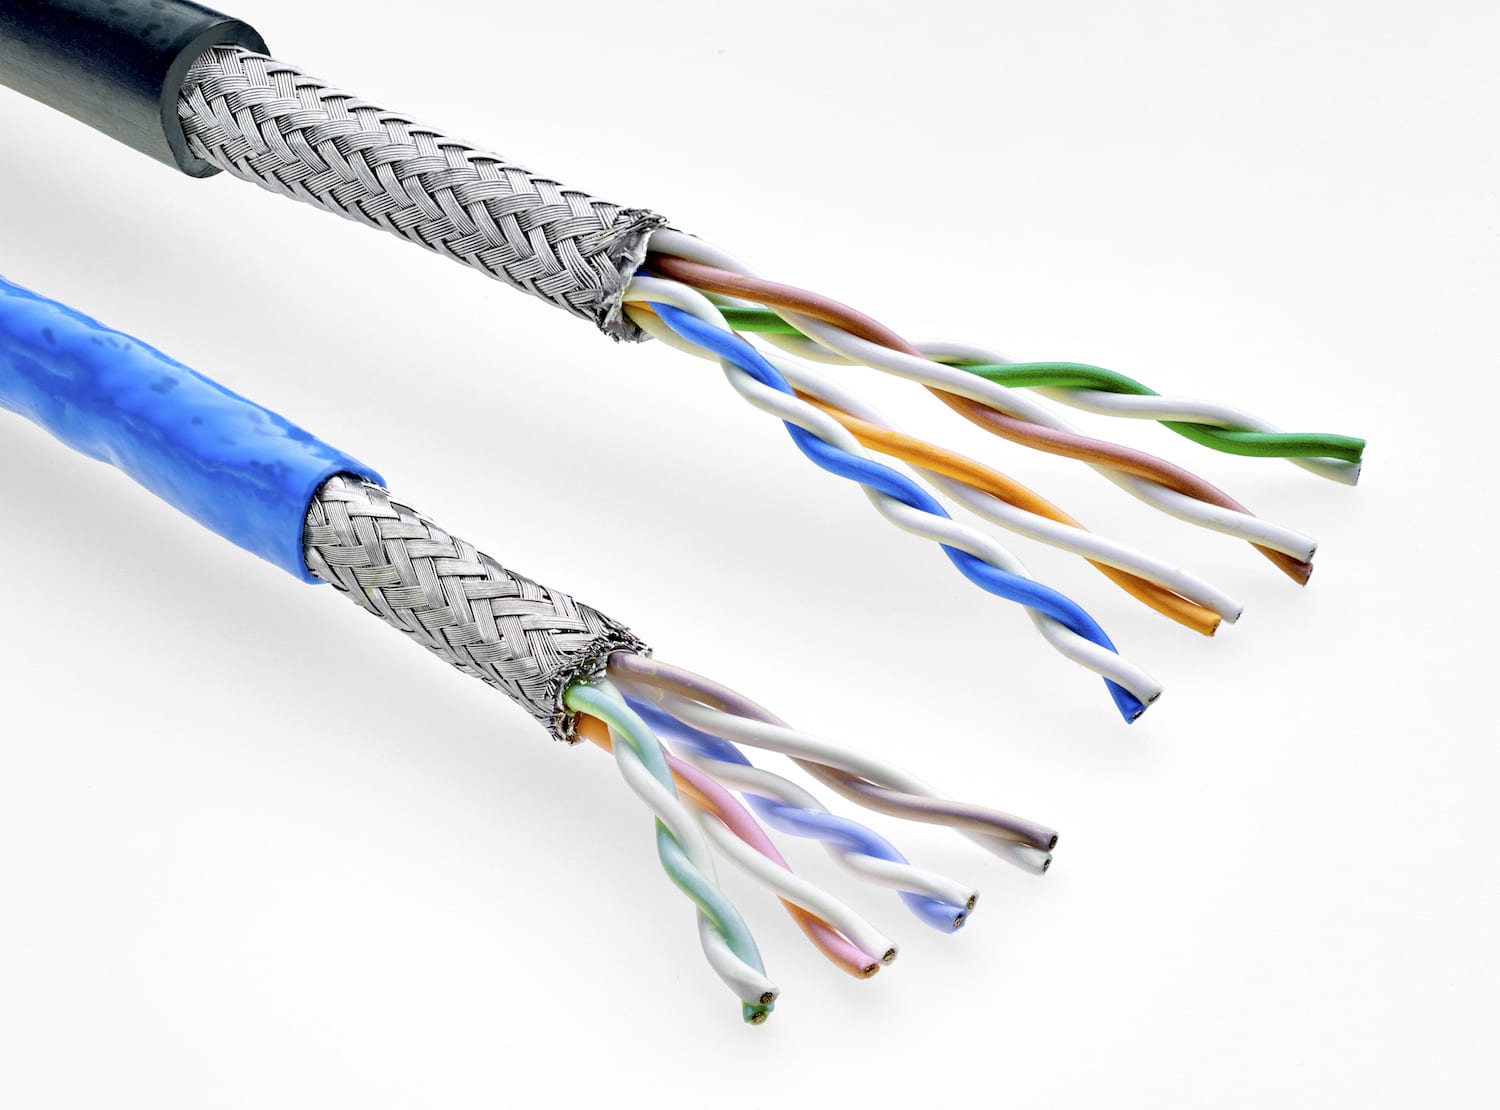 TE Connectivity’s new Raychem Cat 5e cable for high-data-rate, harsh-environment